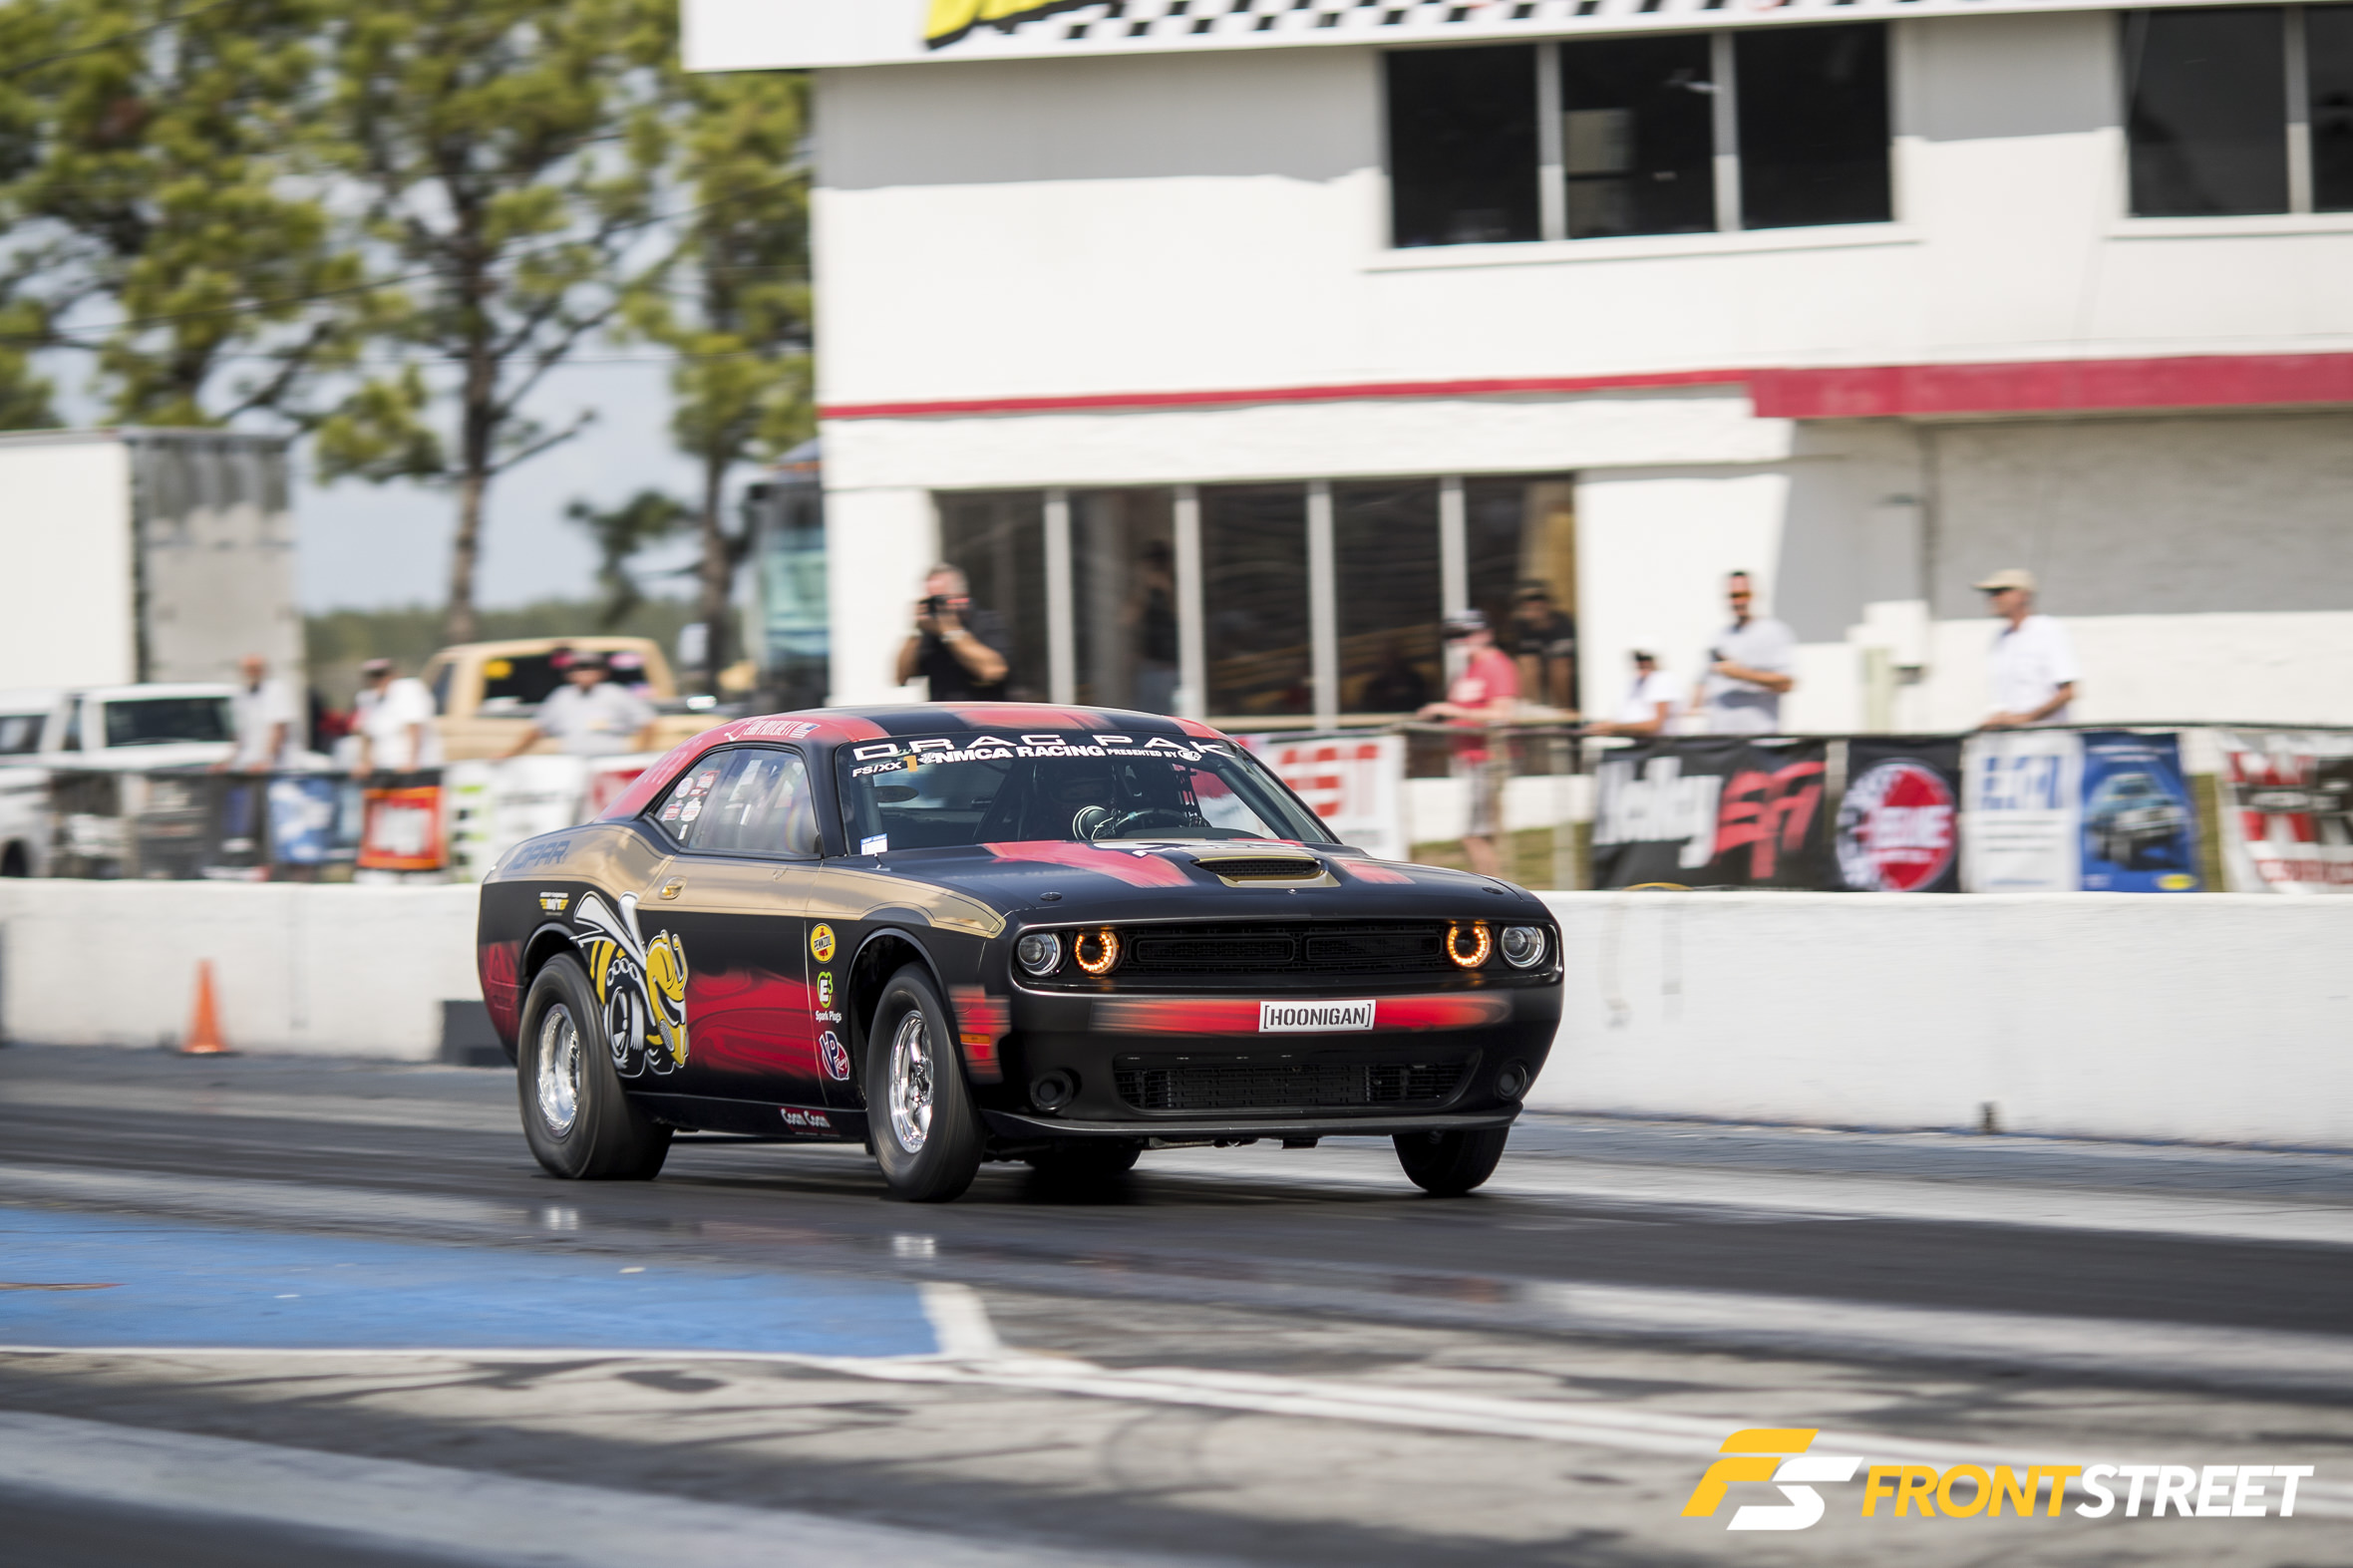 The NMCA Kicks Off 2019 In Style: Factory Super Cars & Pro Mods Steal The Show